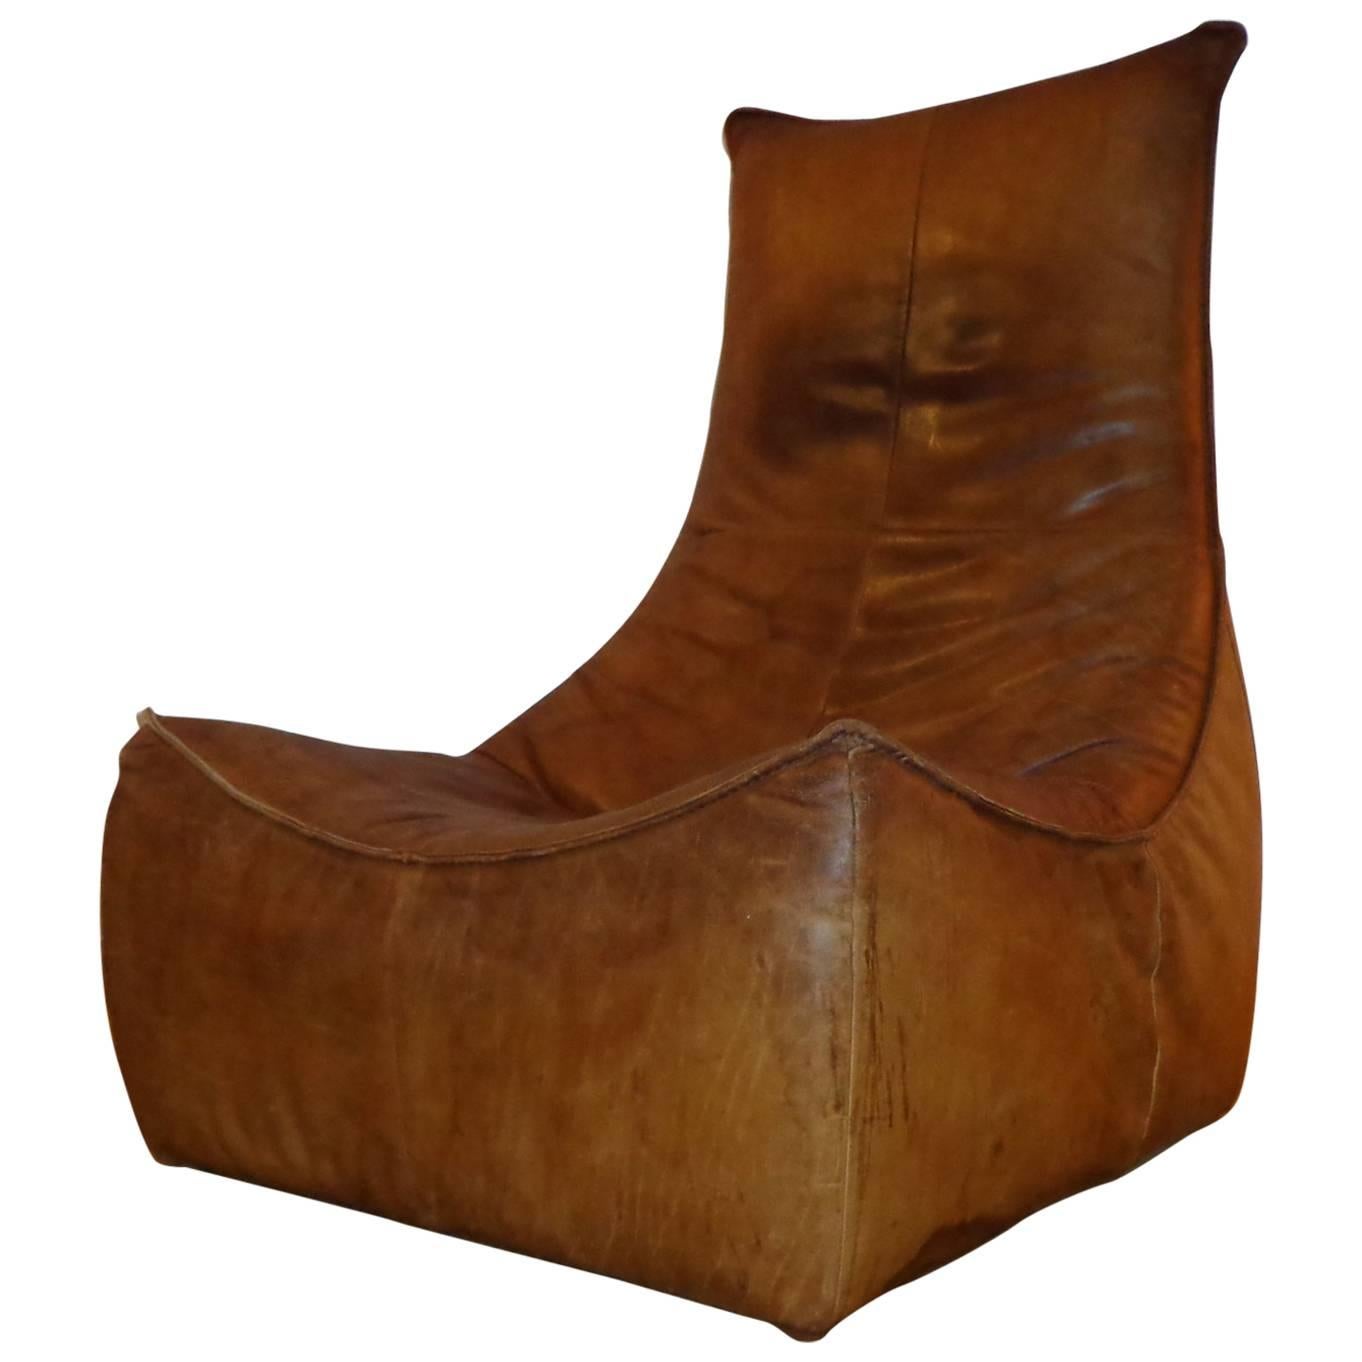 Offerd by Zitzo, Amsterdam: Comfortable love-lounge chair, model Florence in original cognac buffalo leather by Gerard van den Berg for Montis.

Dutch designer Gerard van den Berg created this sculptural sofa in 1970 for Montis, a company he founded